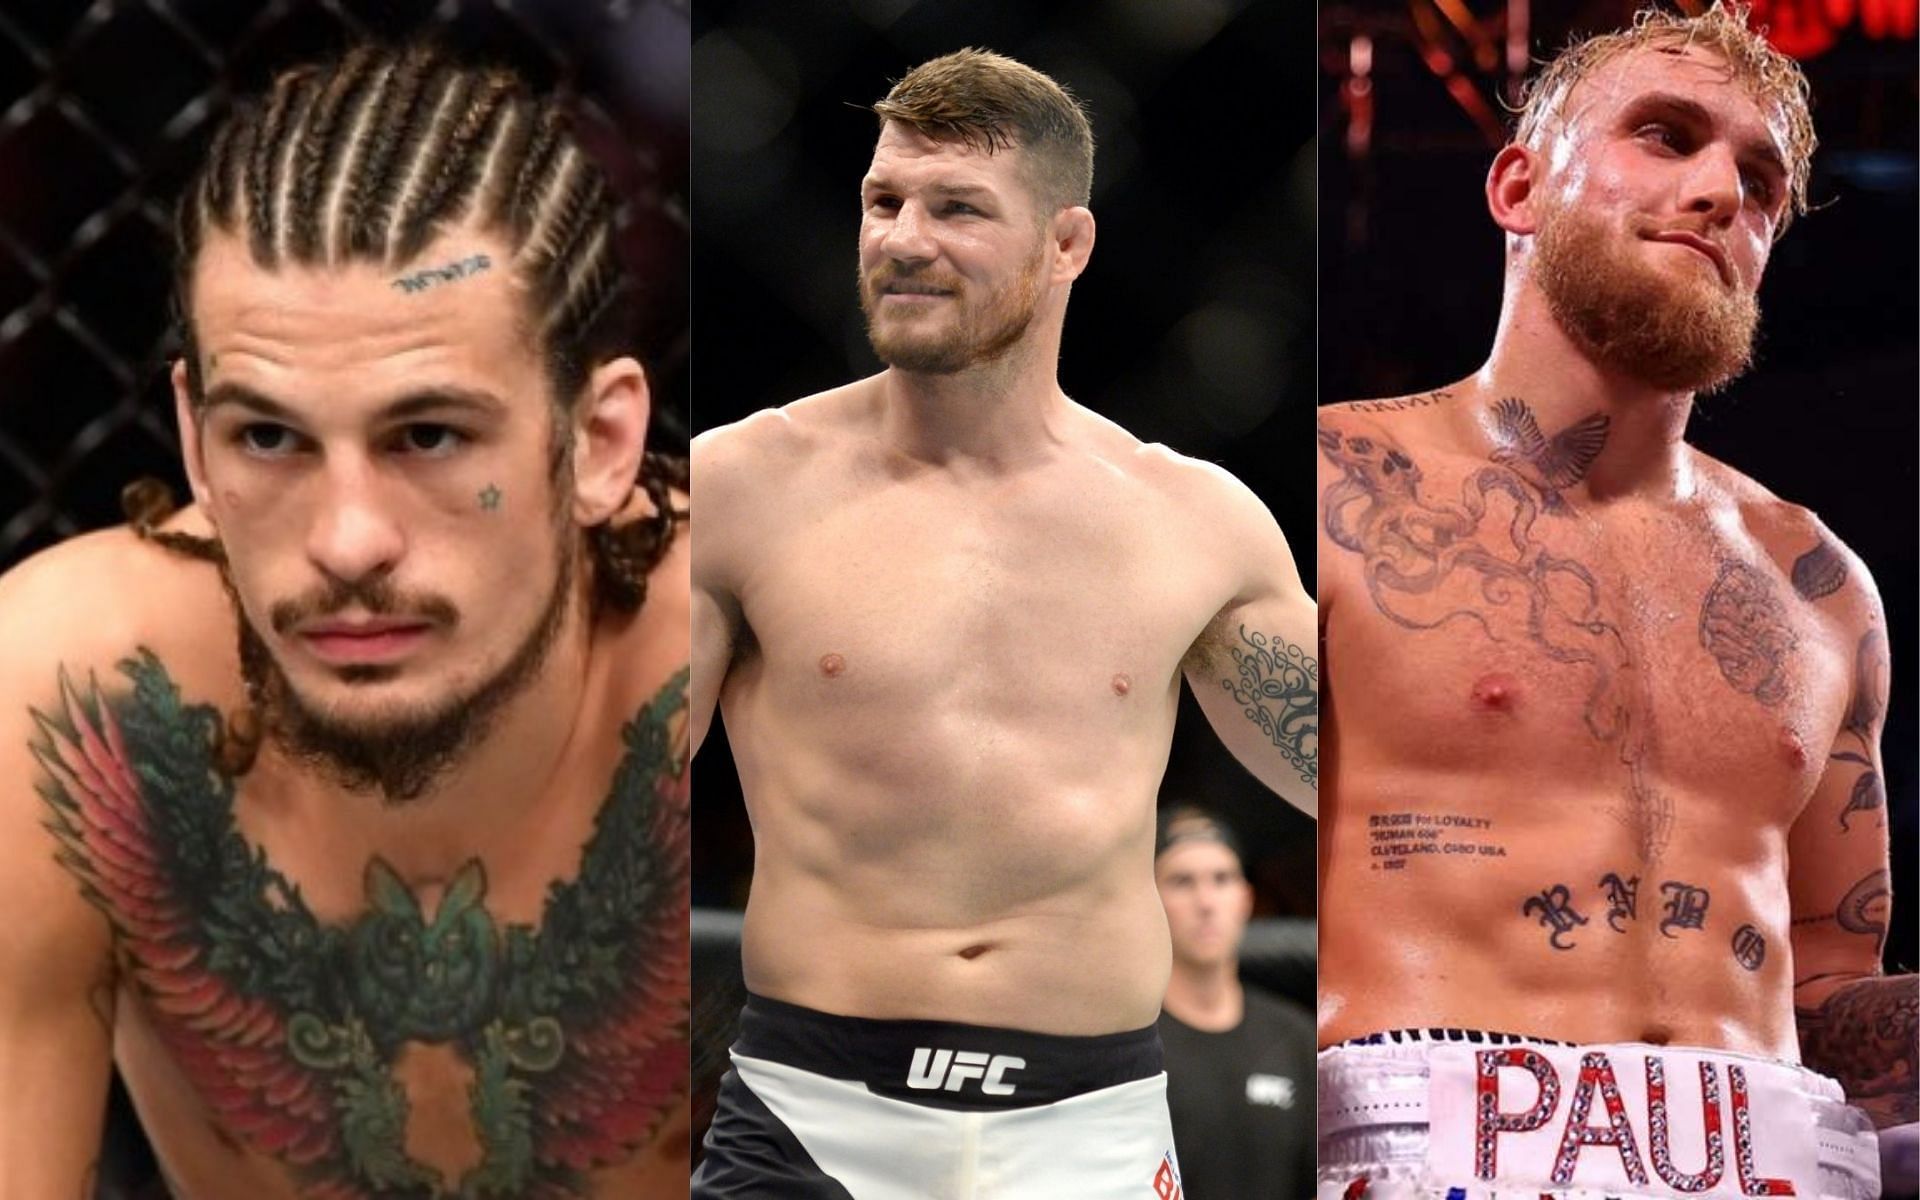 Sean O&#039;Malley (left), Michael Bisping (center), Jake Paul (right) [Image Sources: mmafighting.com and DAZN]